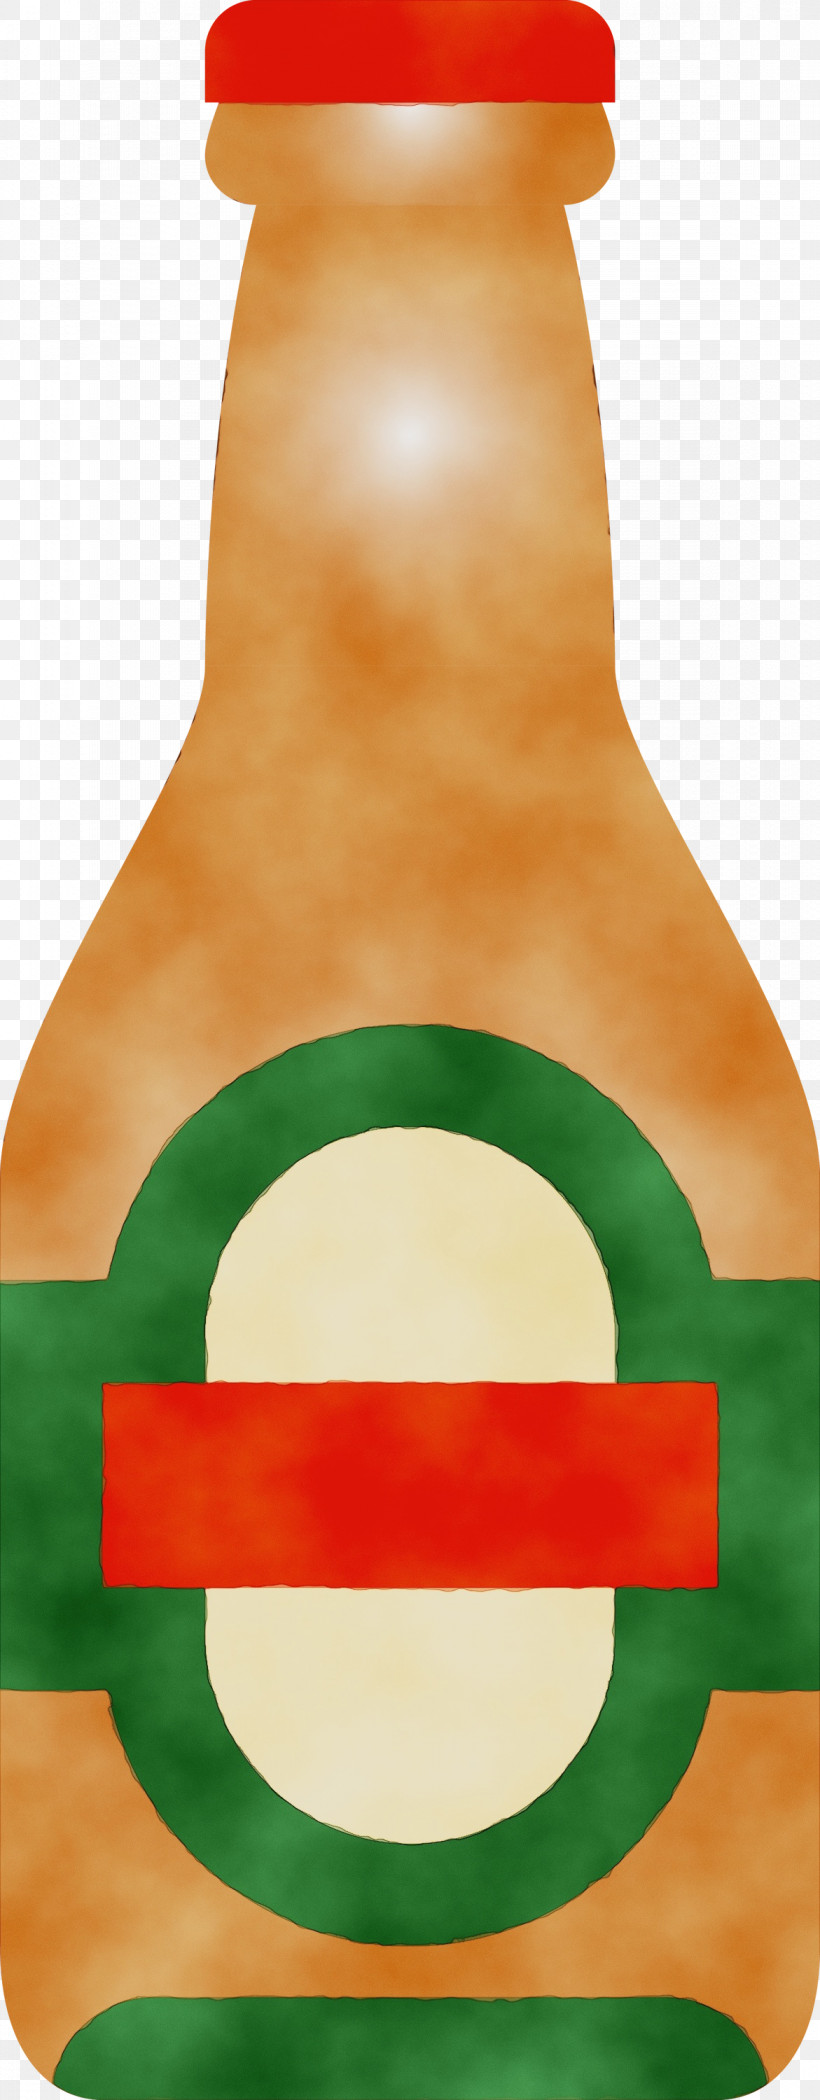 Green, PNG, 1171x3000px, Beer Bottle, Green, Paint, Watercolor, Wet Ink Download Free